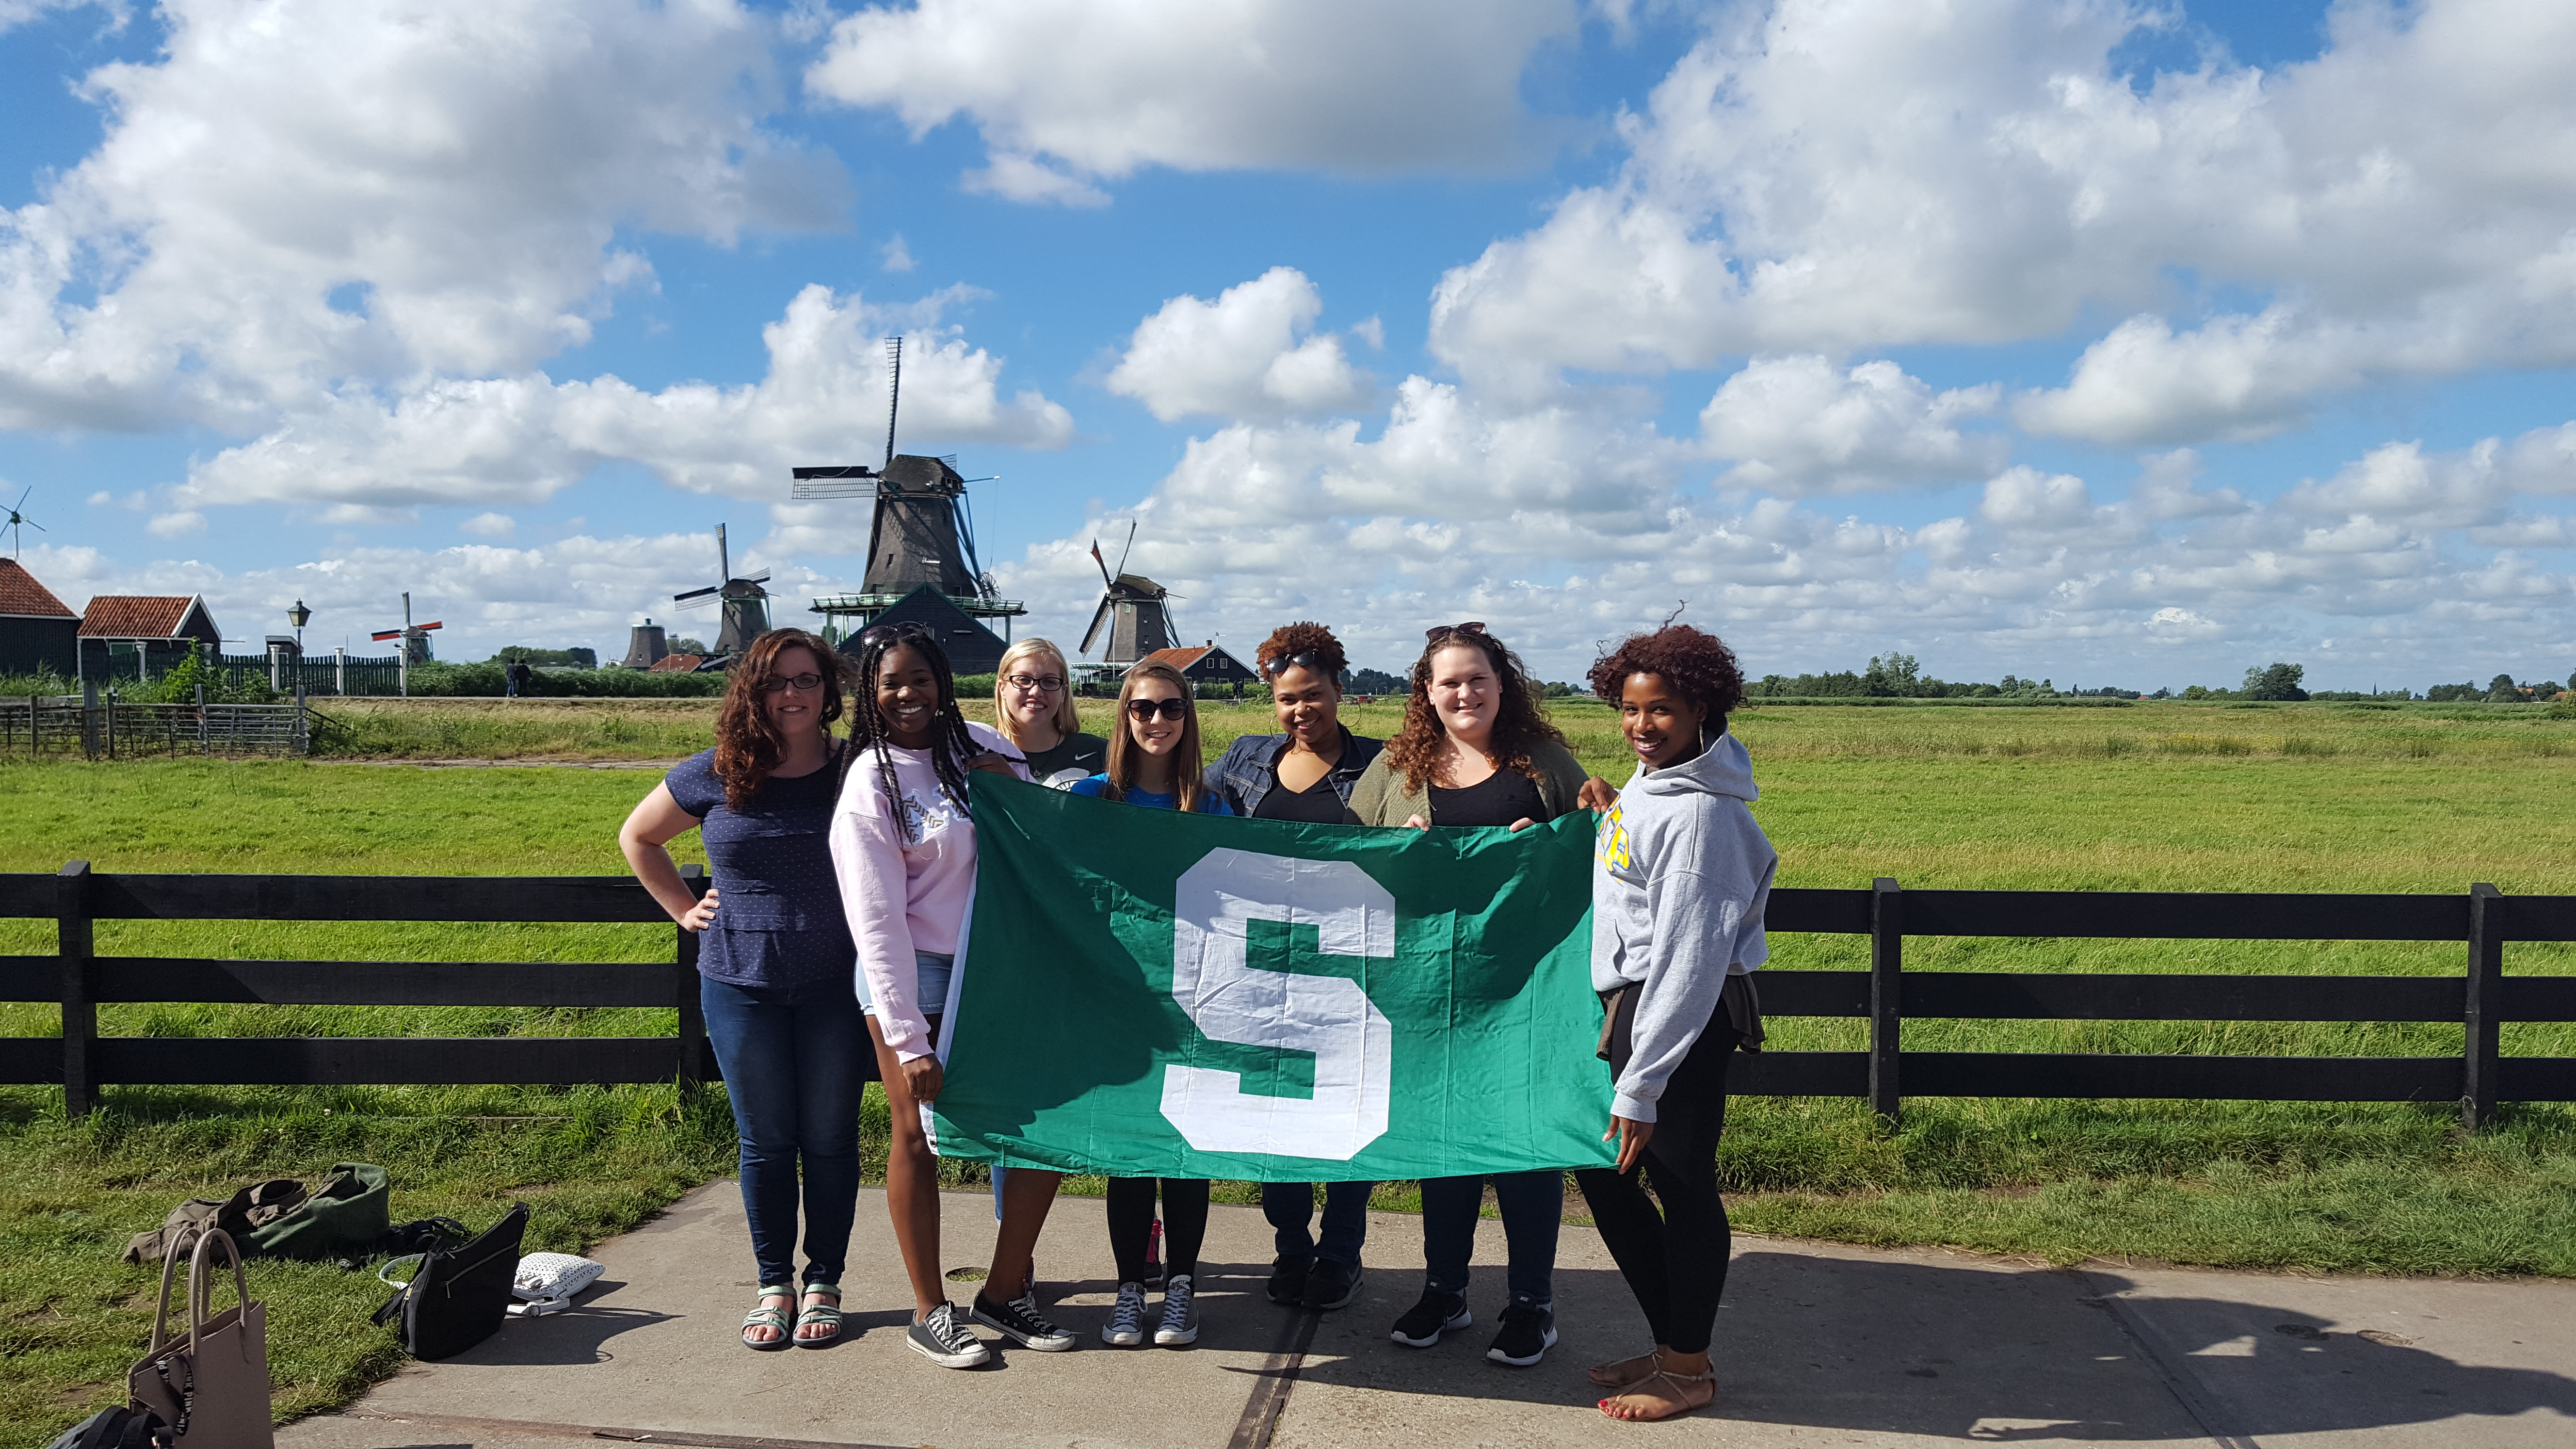 London study abroad student group standing in field holding MSU spartan flag